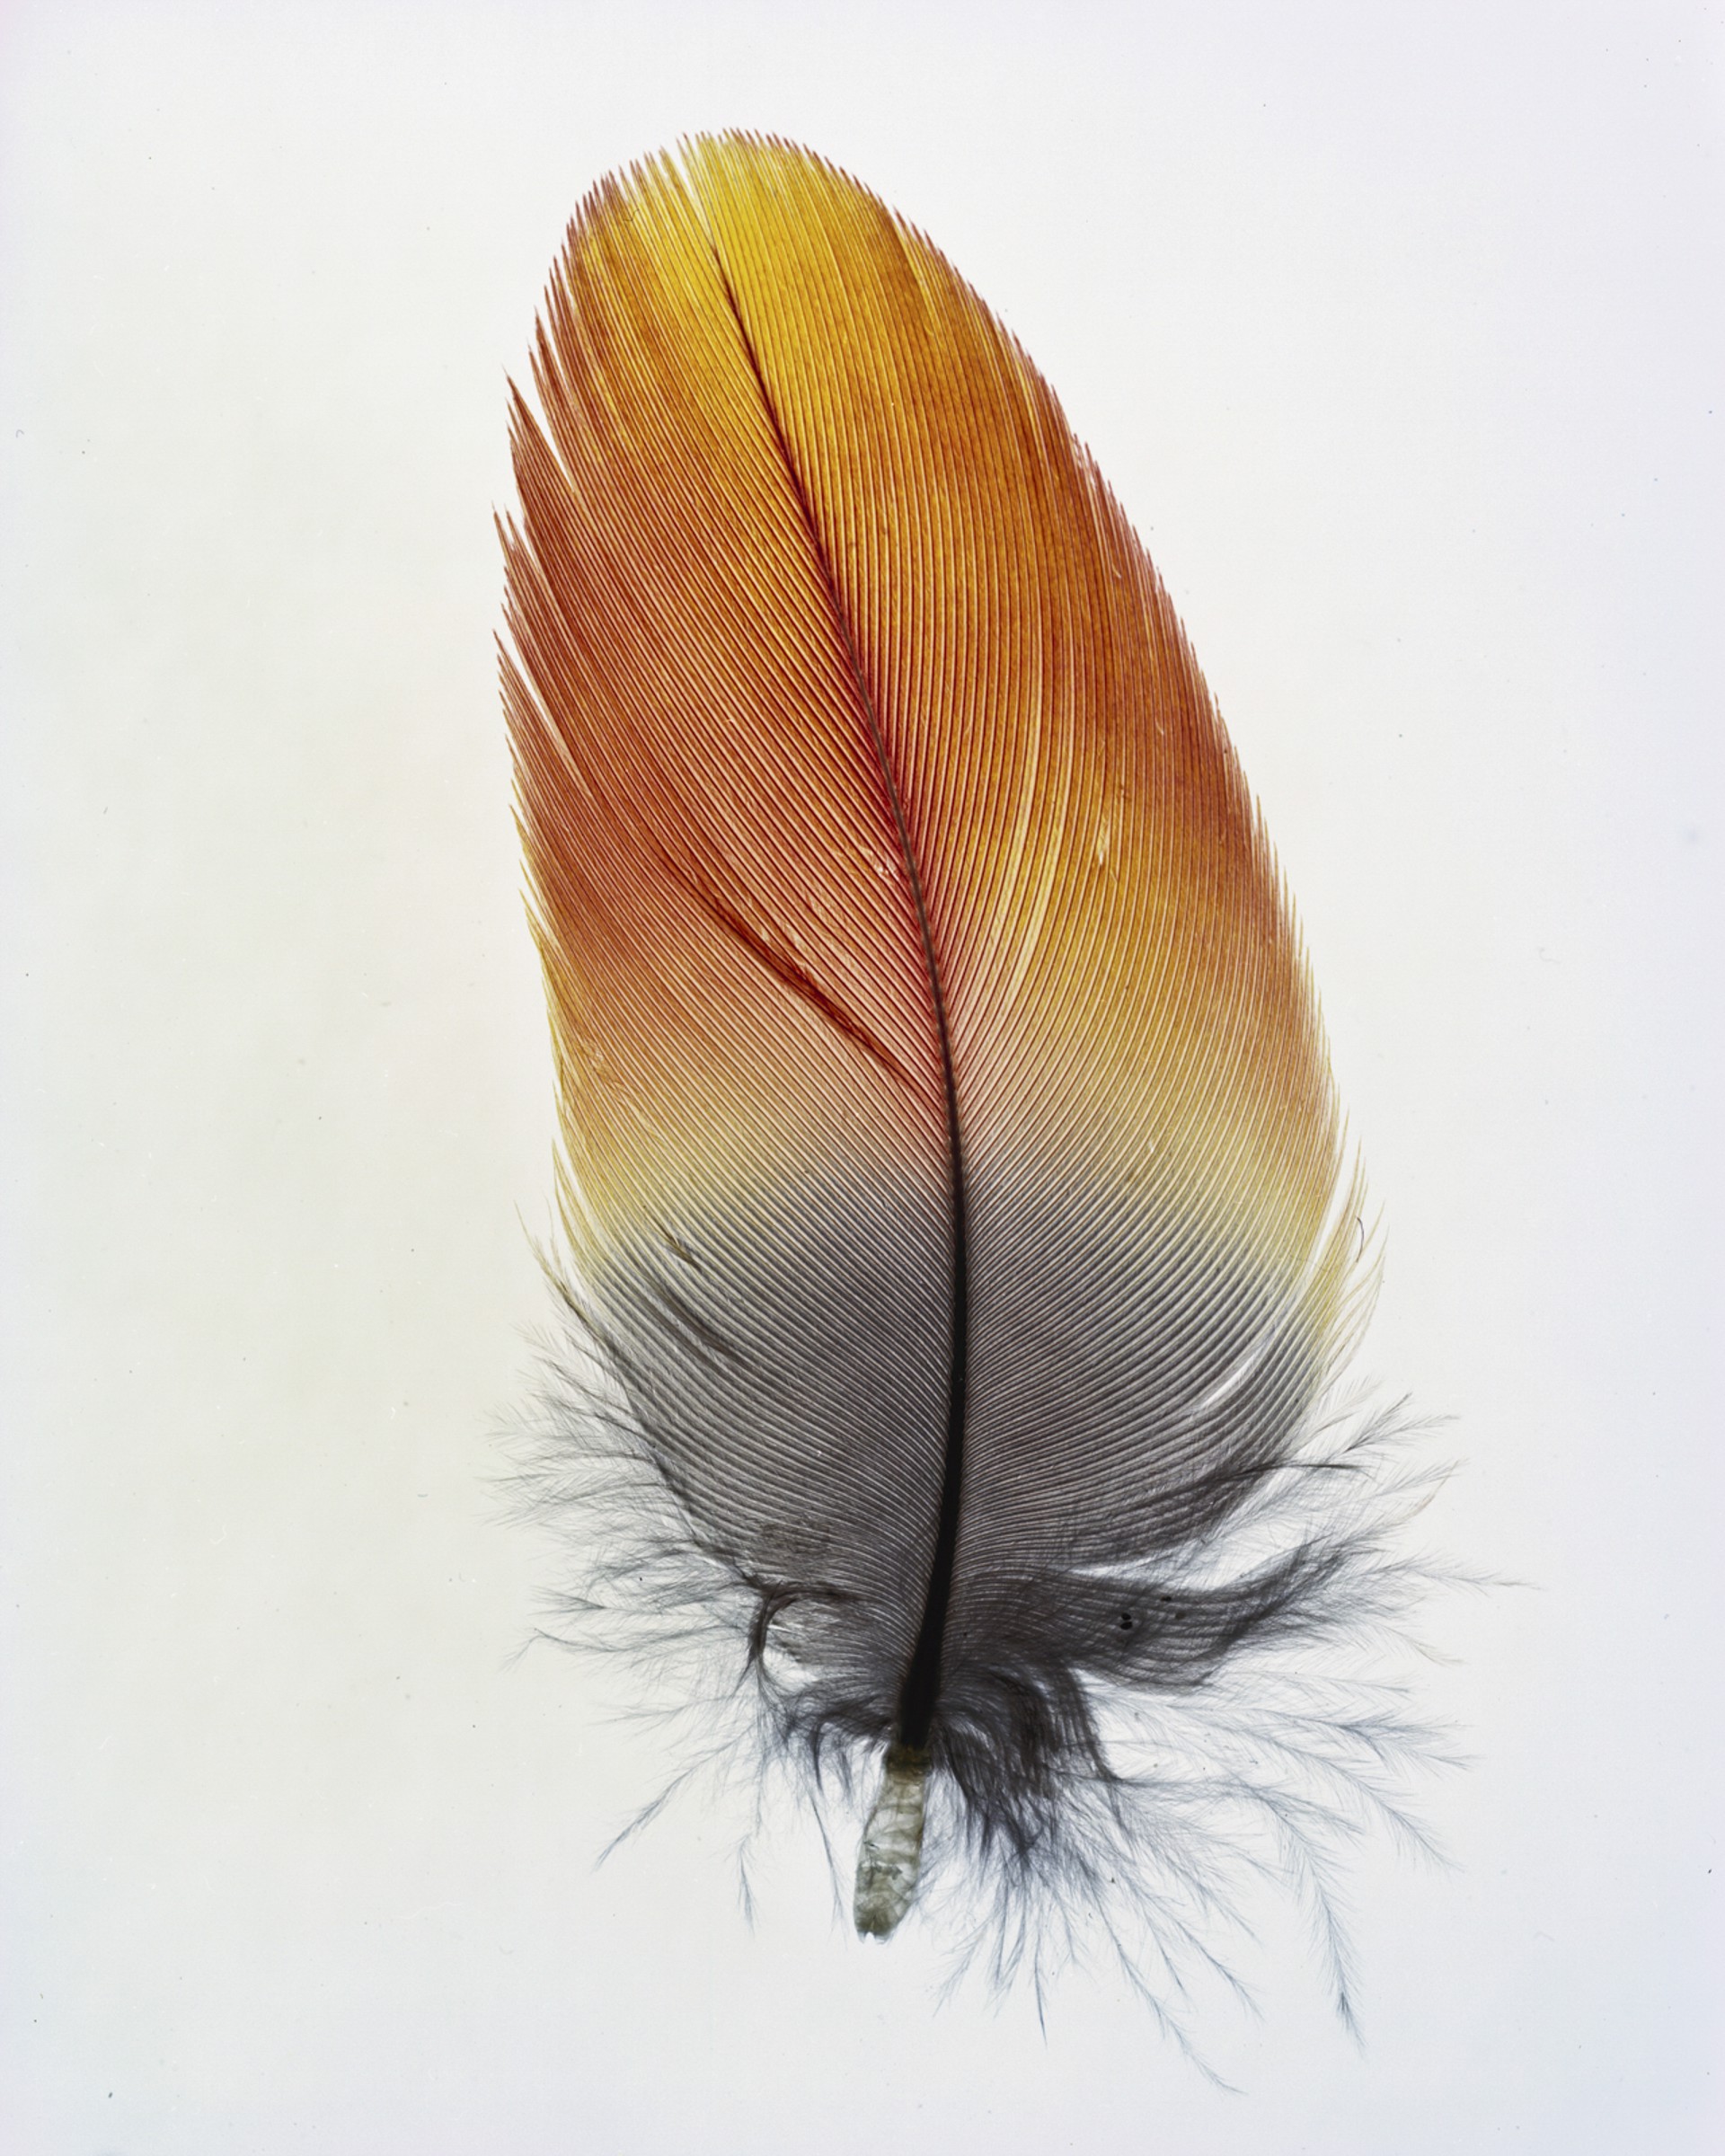 Feather Study #12 by Taylor Curry